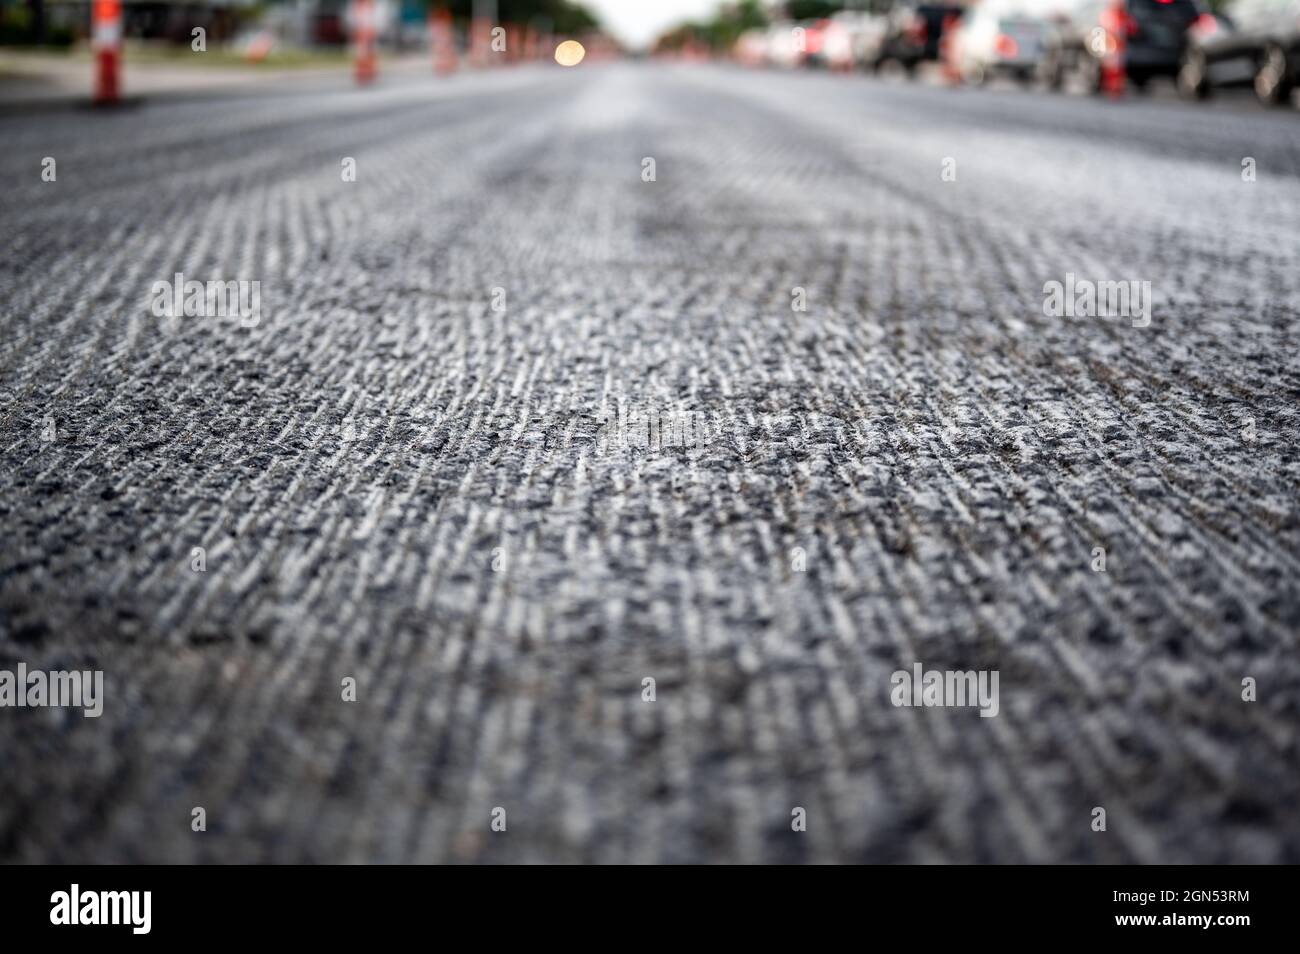 Low angle shot across a scarified street under construction with lanes on either side blocked off. Stock Photo